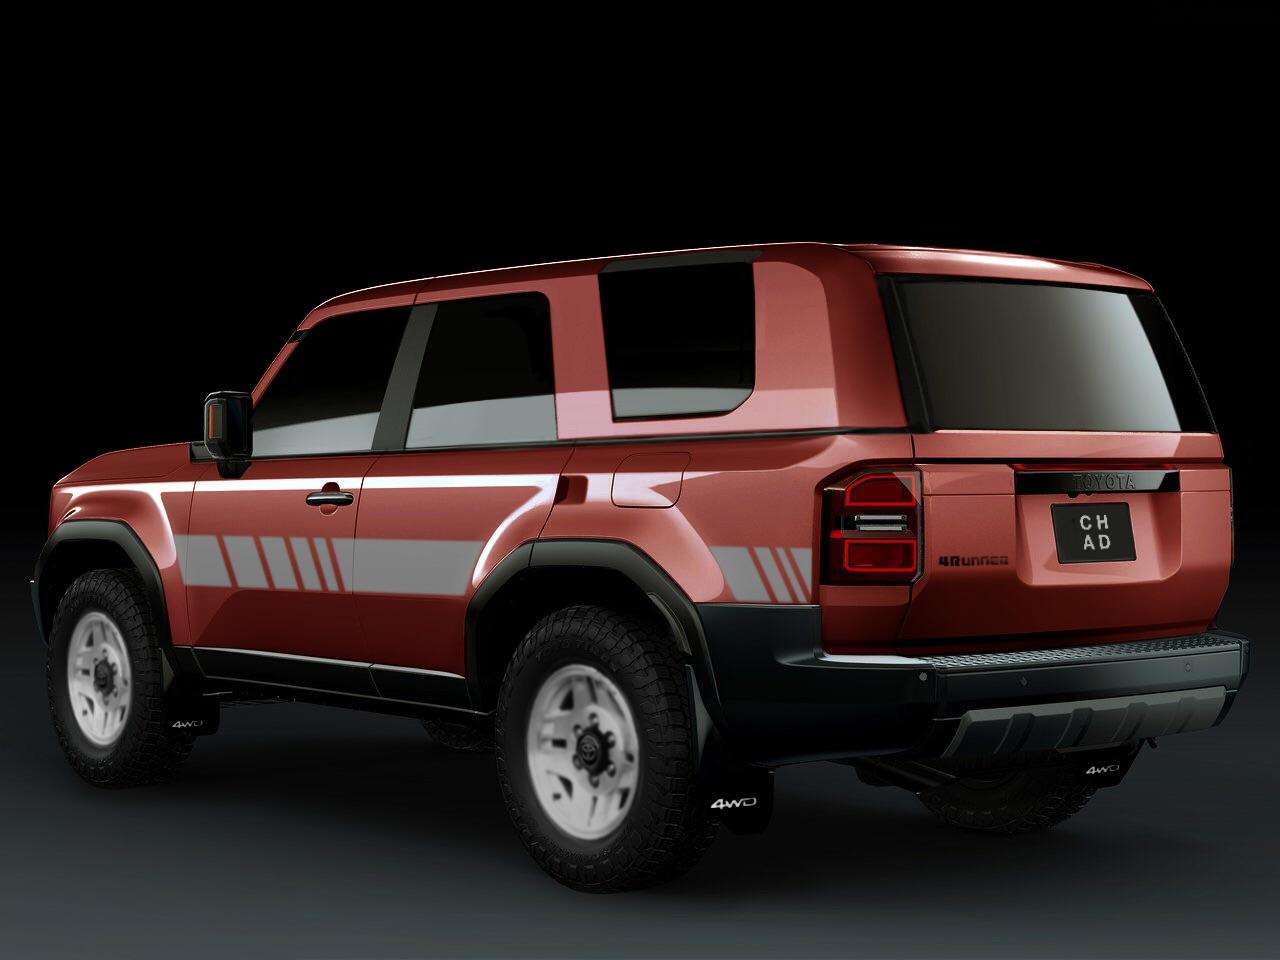 2025 Toyota 4runner Rendered: Topless 2025 4Runner based on the LC250. 00196FCD-6C85-4FBB-9A56-02A39CB36642